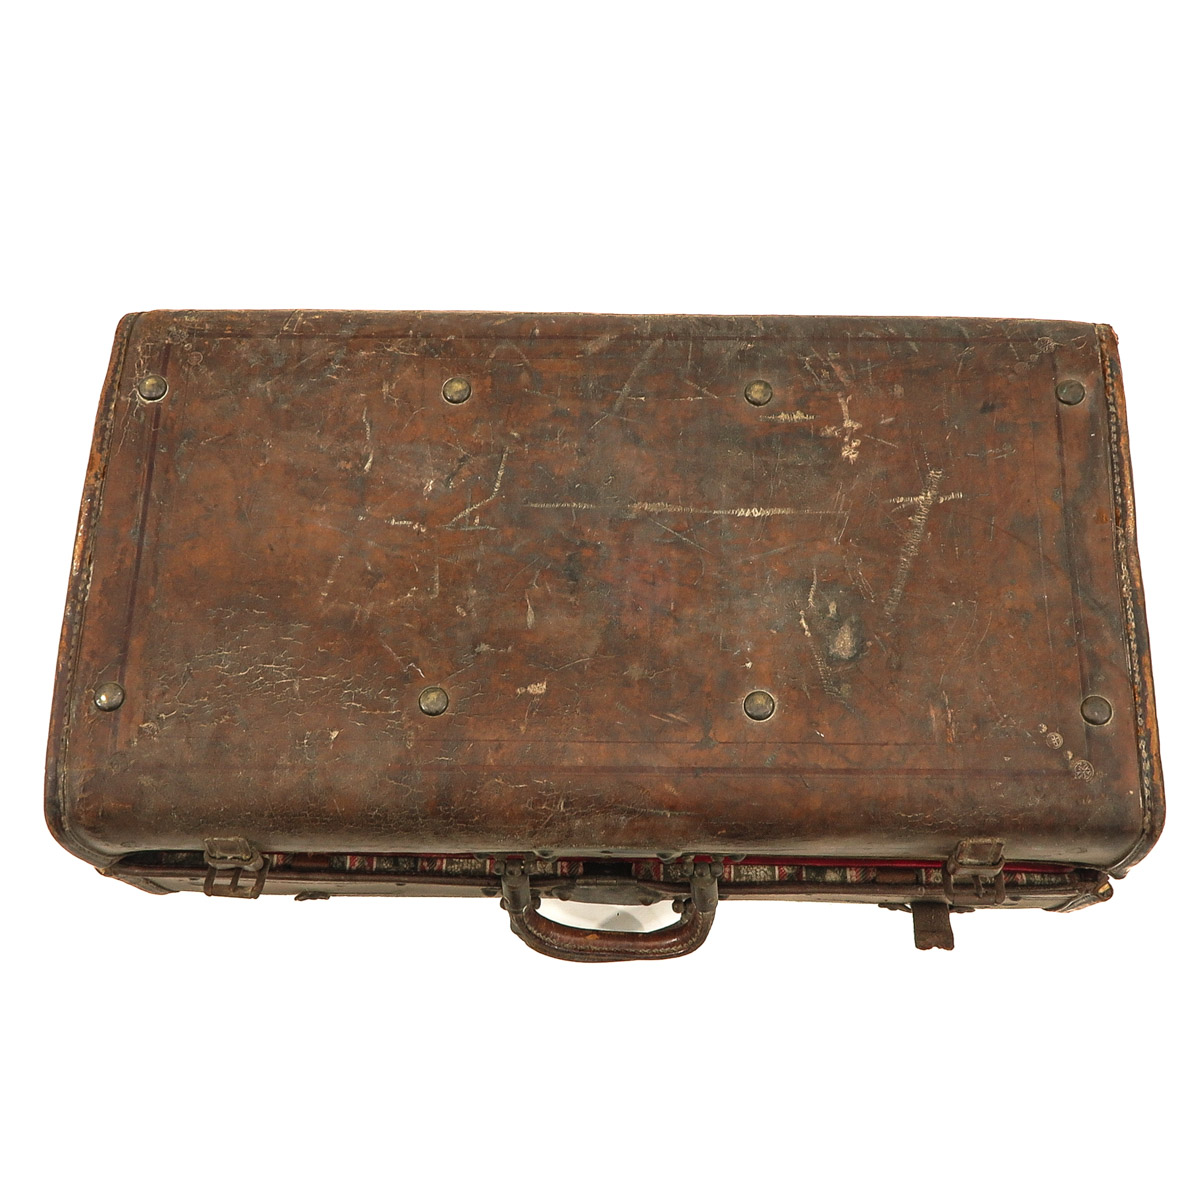 A Leather and Silk Suitcase - Image 7 of 10